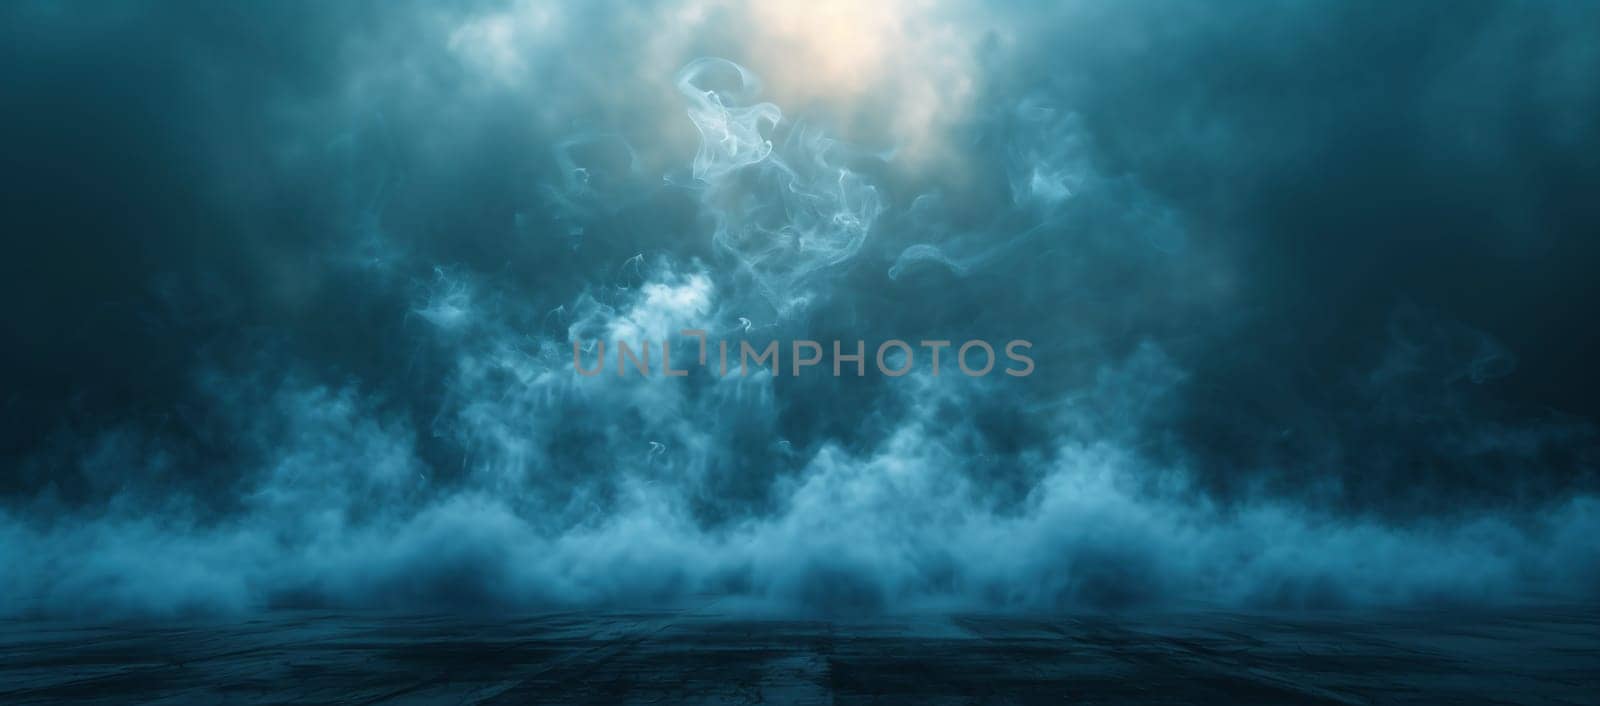 Epic sea background, storm in the sea. Digital illustration, digital painting. by Andelov13